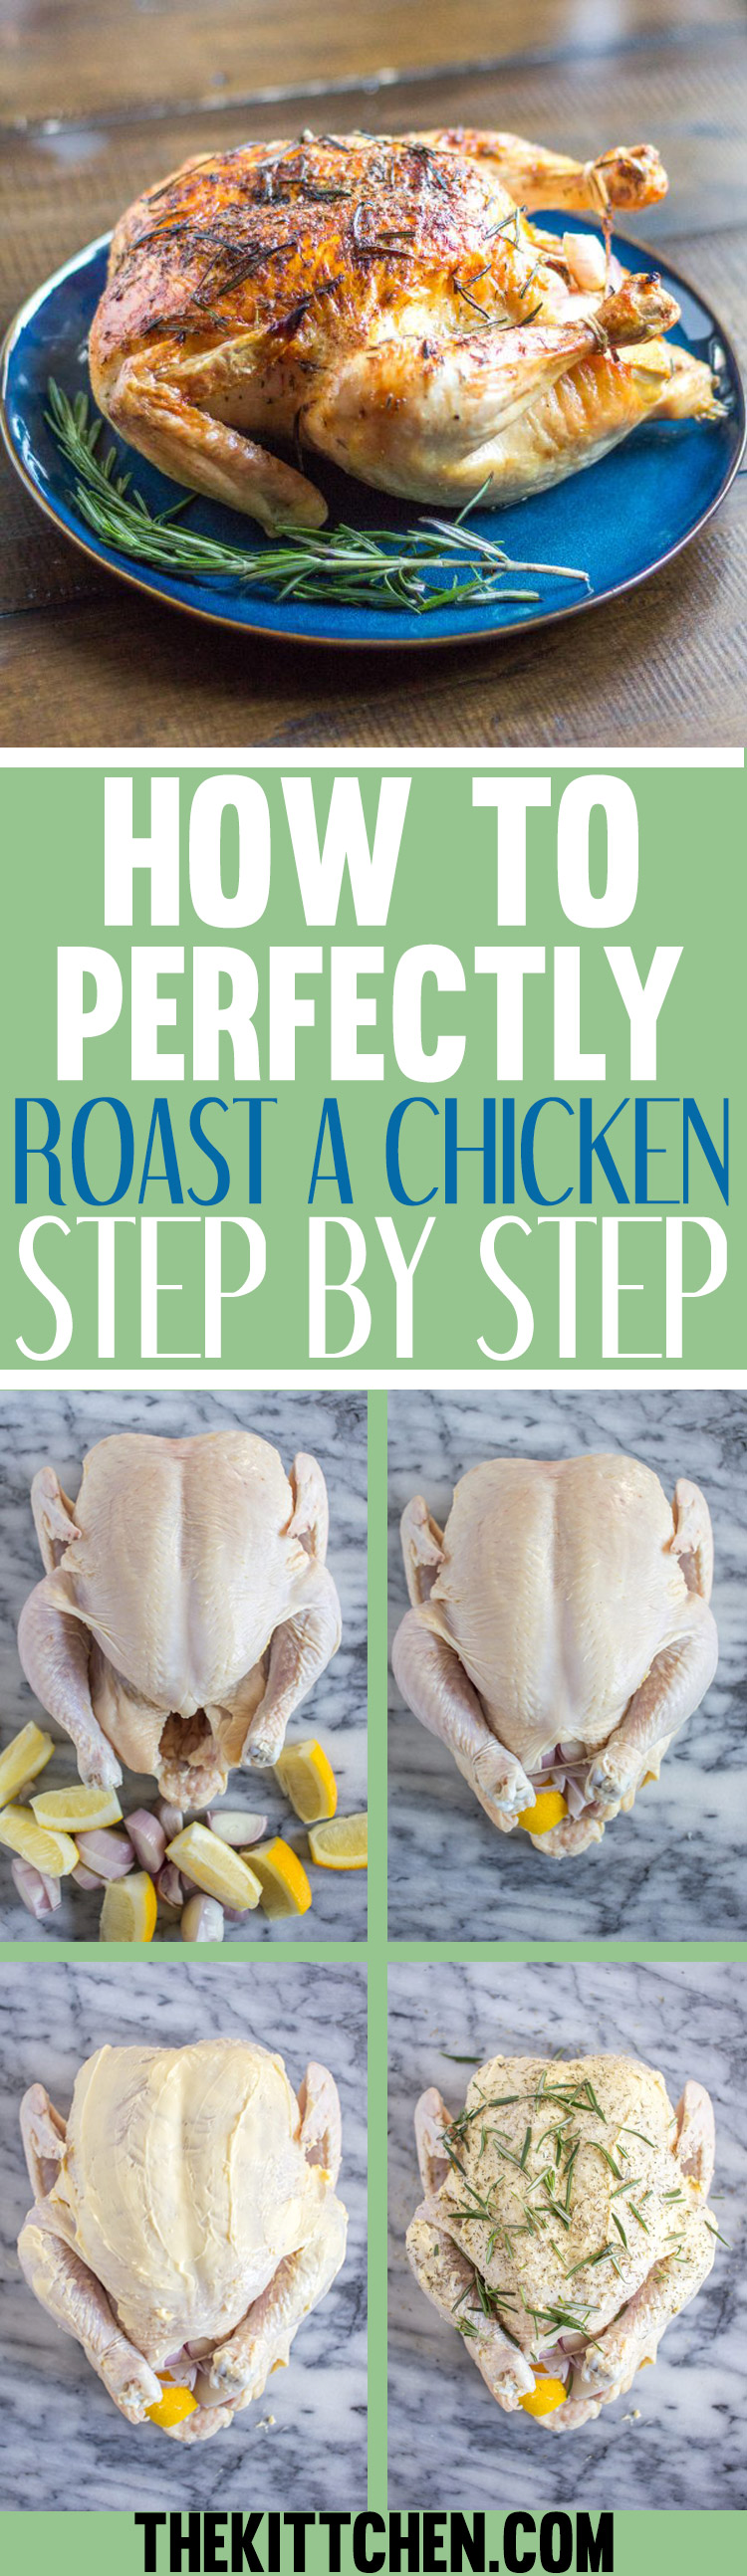 How to perfectly roast a chicken